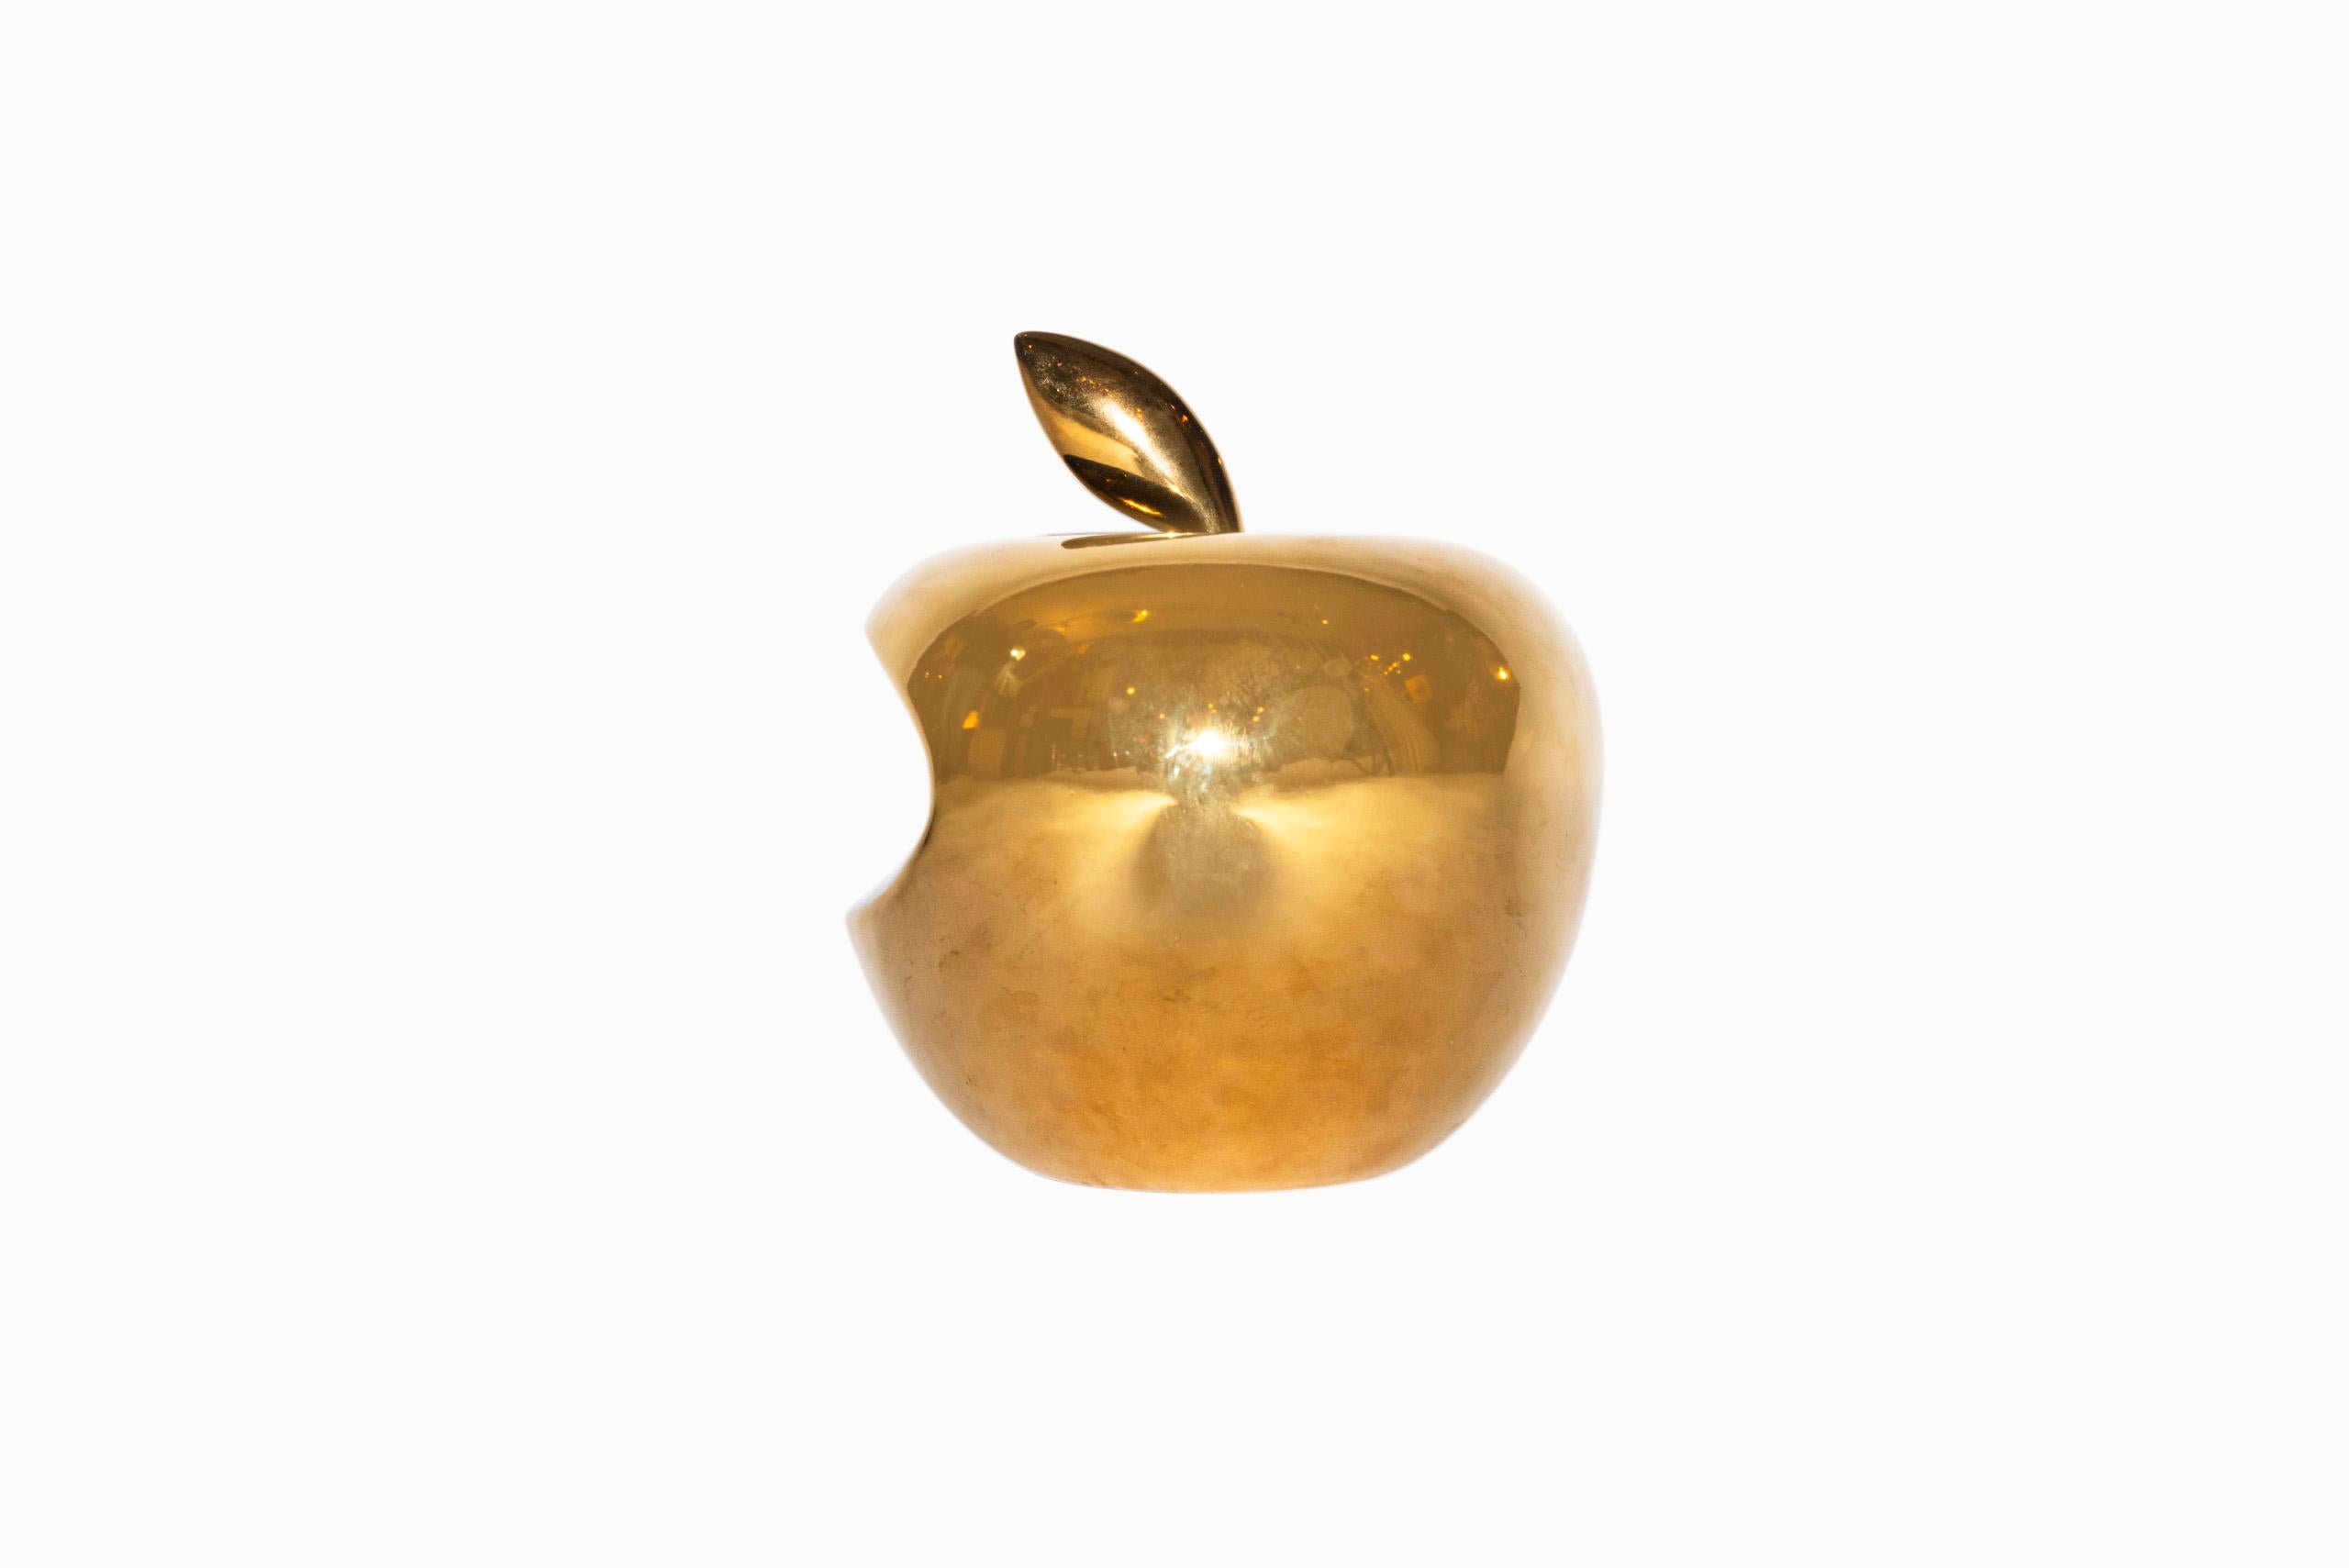 Li Lihong (born in 1970), Golden Apple-China,
enamelled porcelain signed and numbered under the base counter signed in pinyin, 
Galerie Loft edition, Paris, 300 copies.
Chine, circa 2010.

Measures: Height 19 cm, diameter 16 cm.

Li Lihong is an